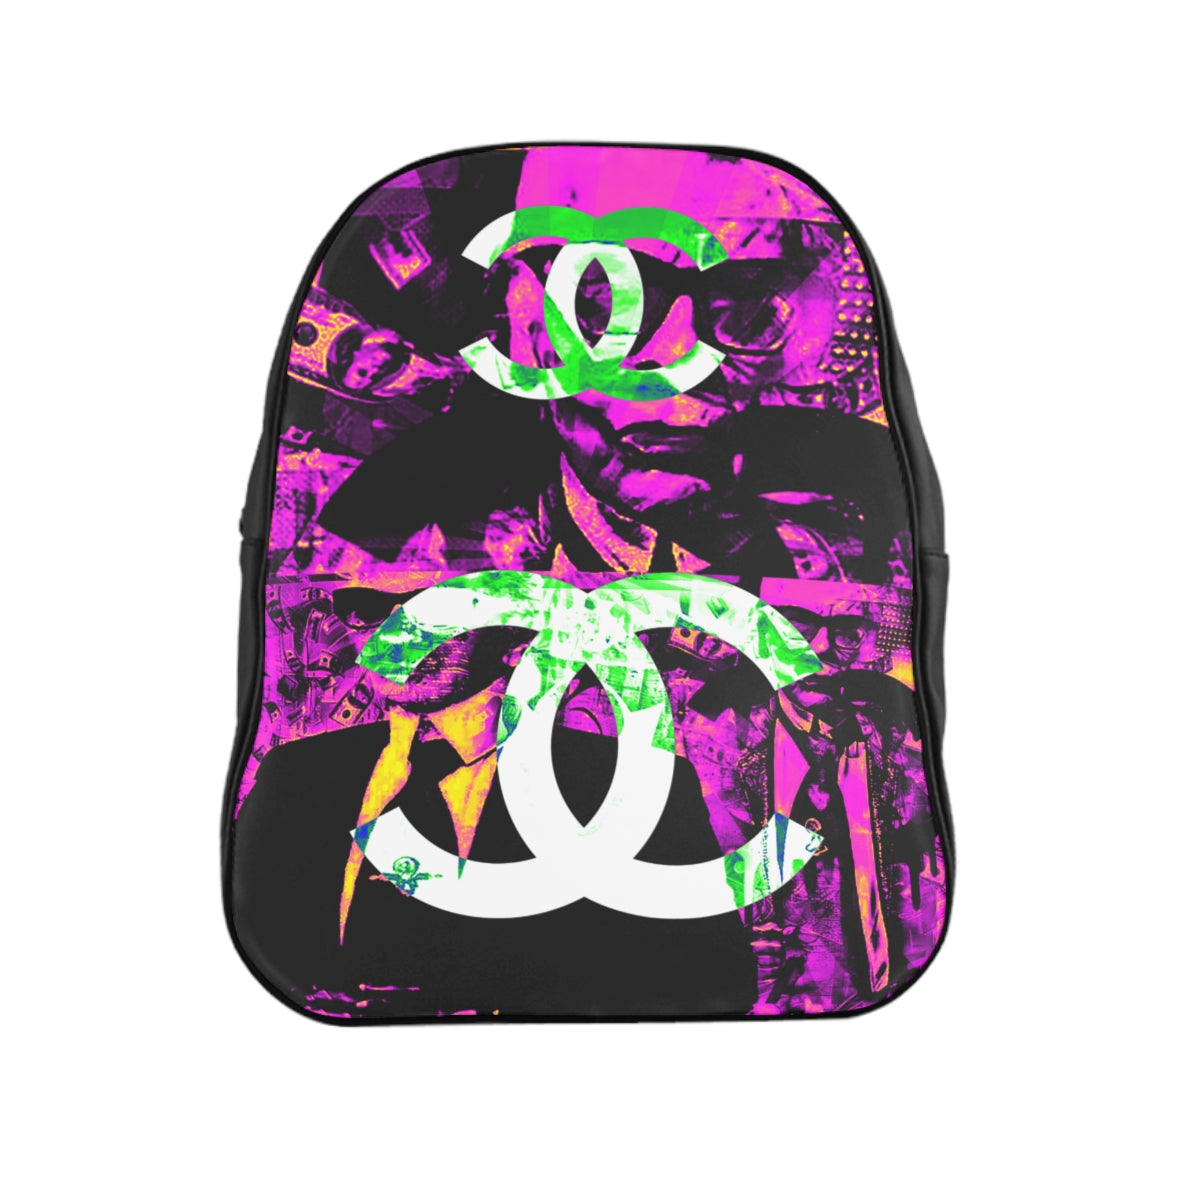 Getrott Inspired by C h a n e l Graffiti Pink School Backpack Carry-On Travel Check Luggage 4-Wheel Spinner Suitcase Bag Multiple Colors and Sizes